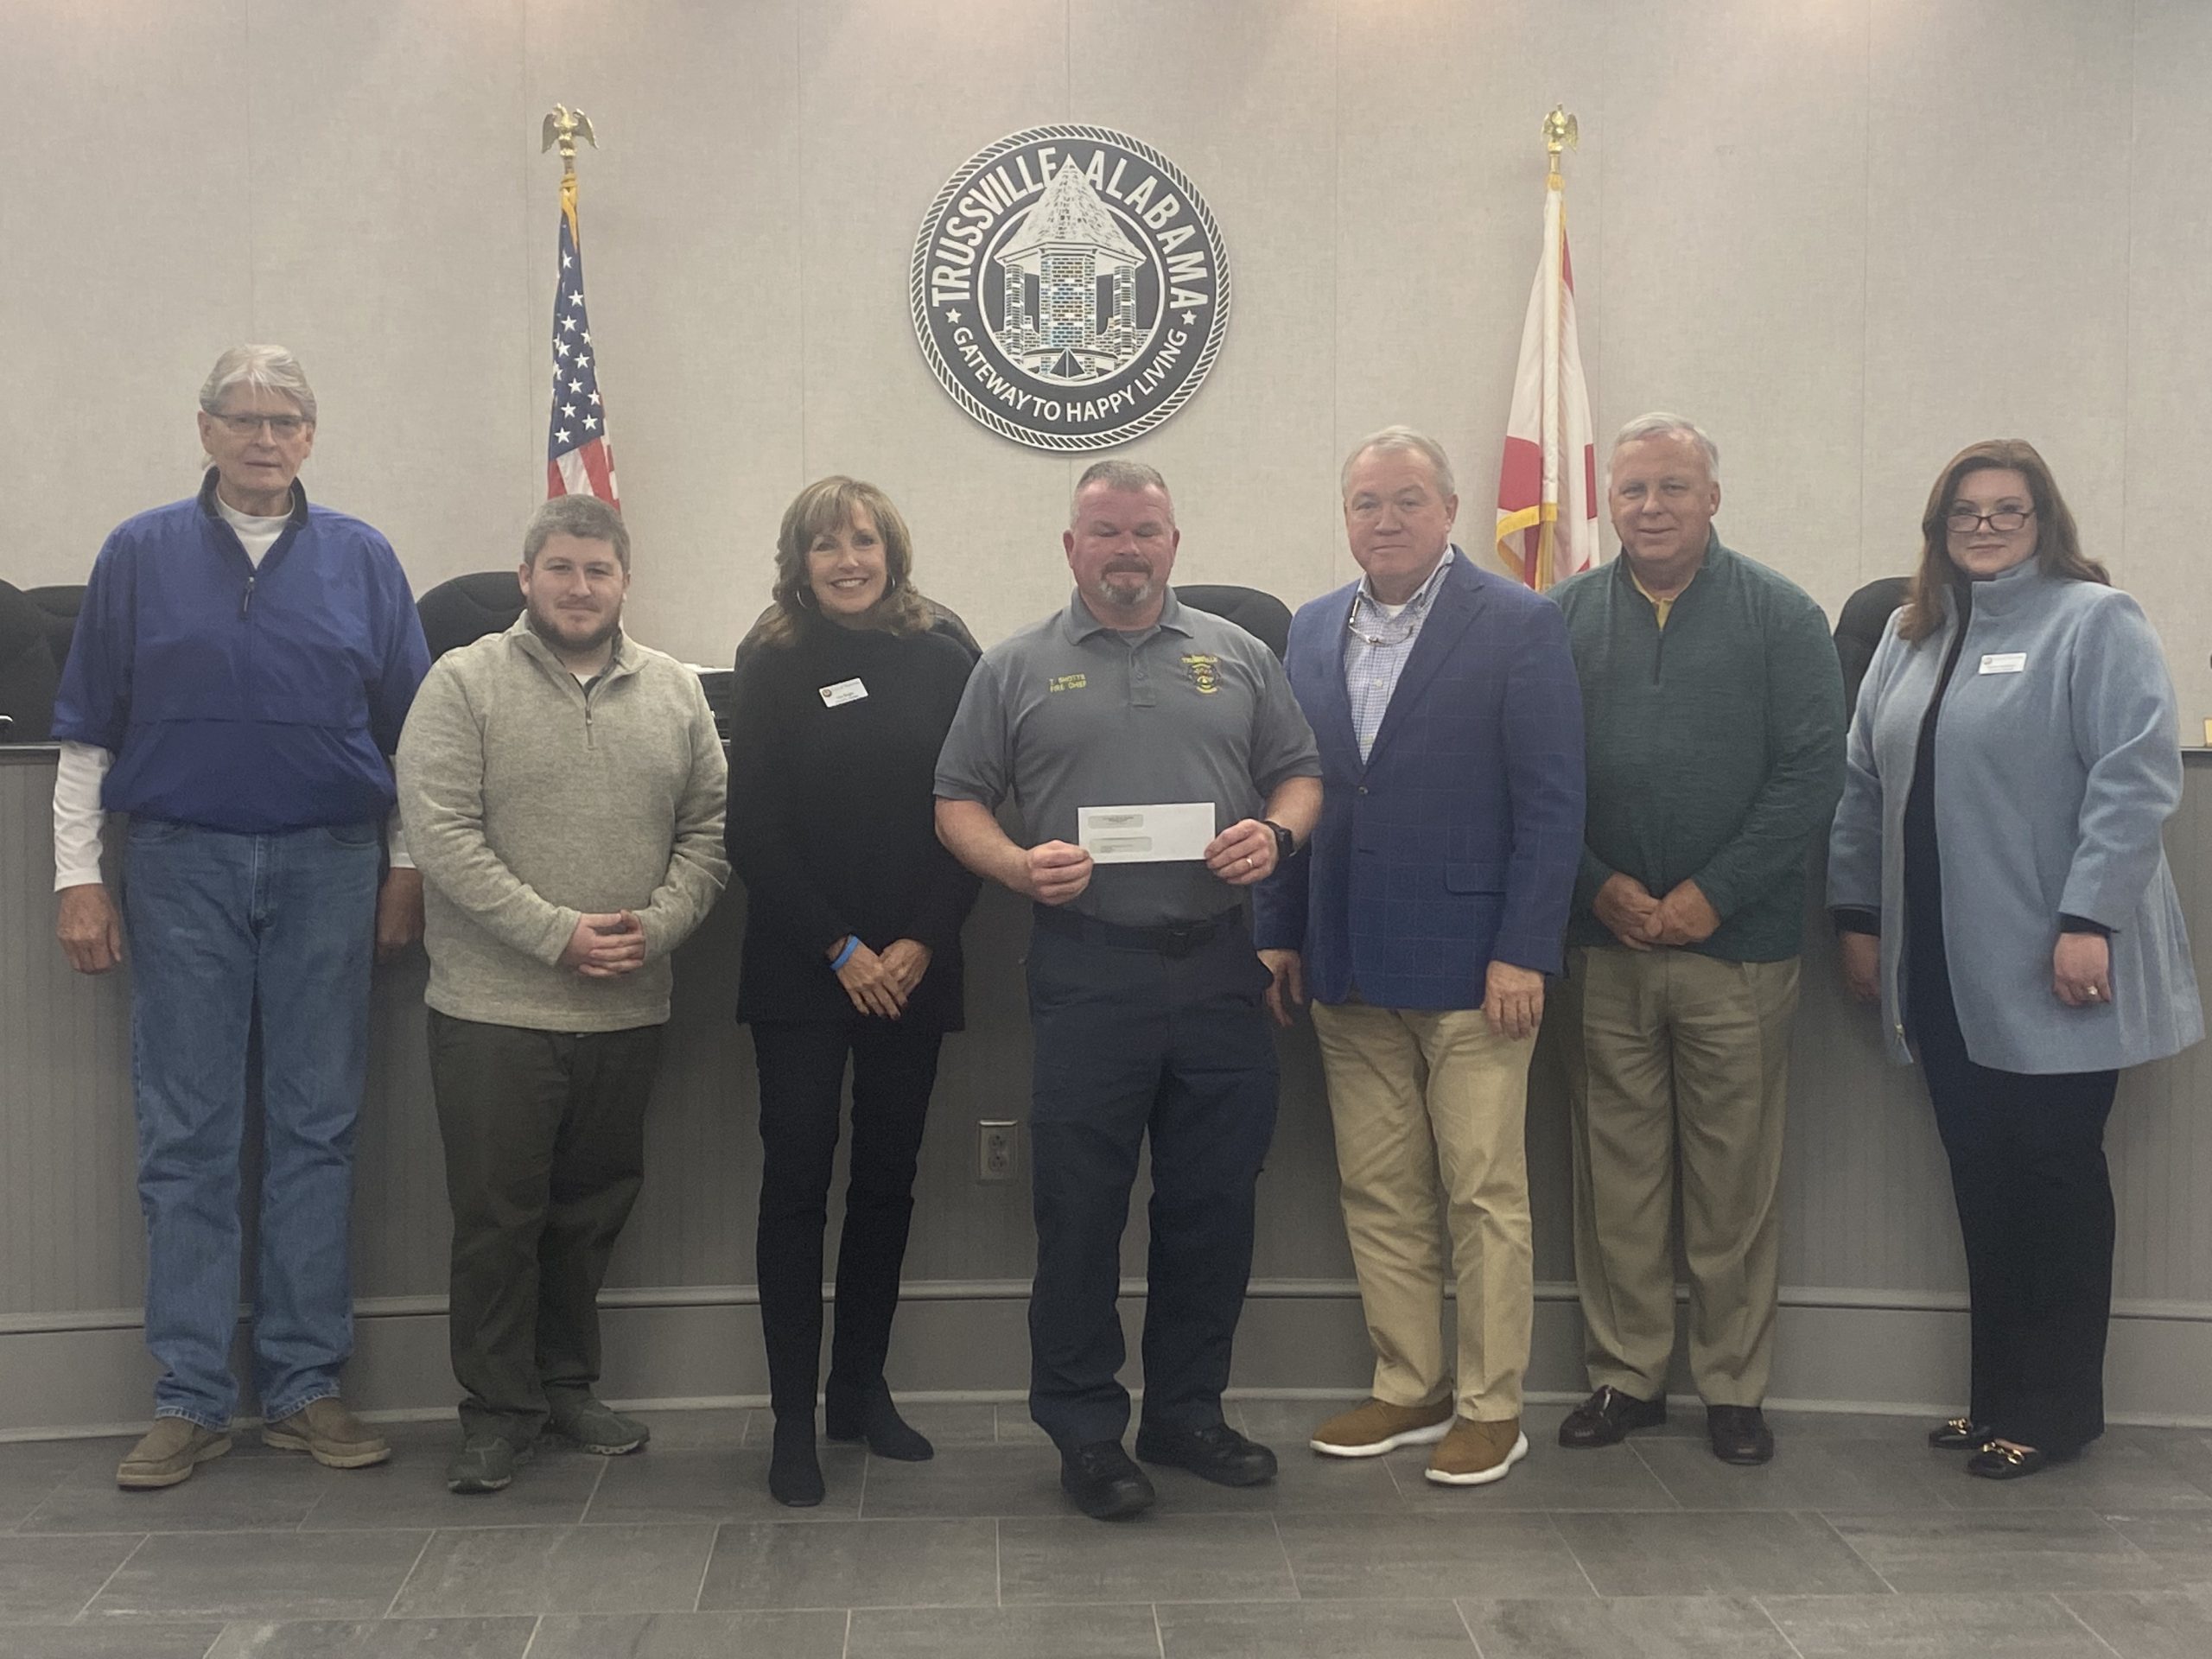 Trussville City Council presents check to Trussville Fire Department’s ‘Christmas for Kids’ program